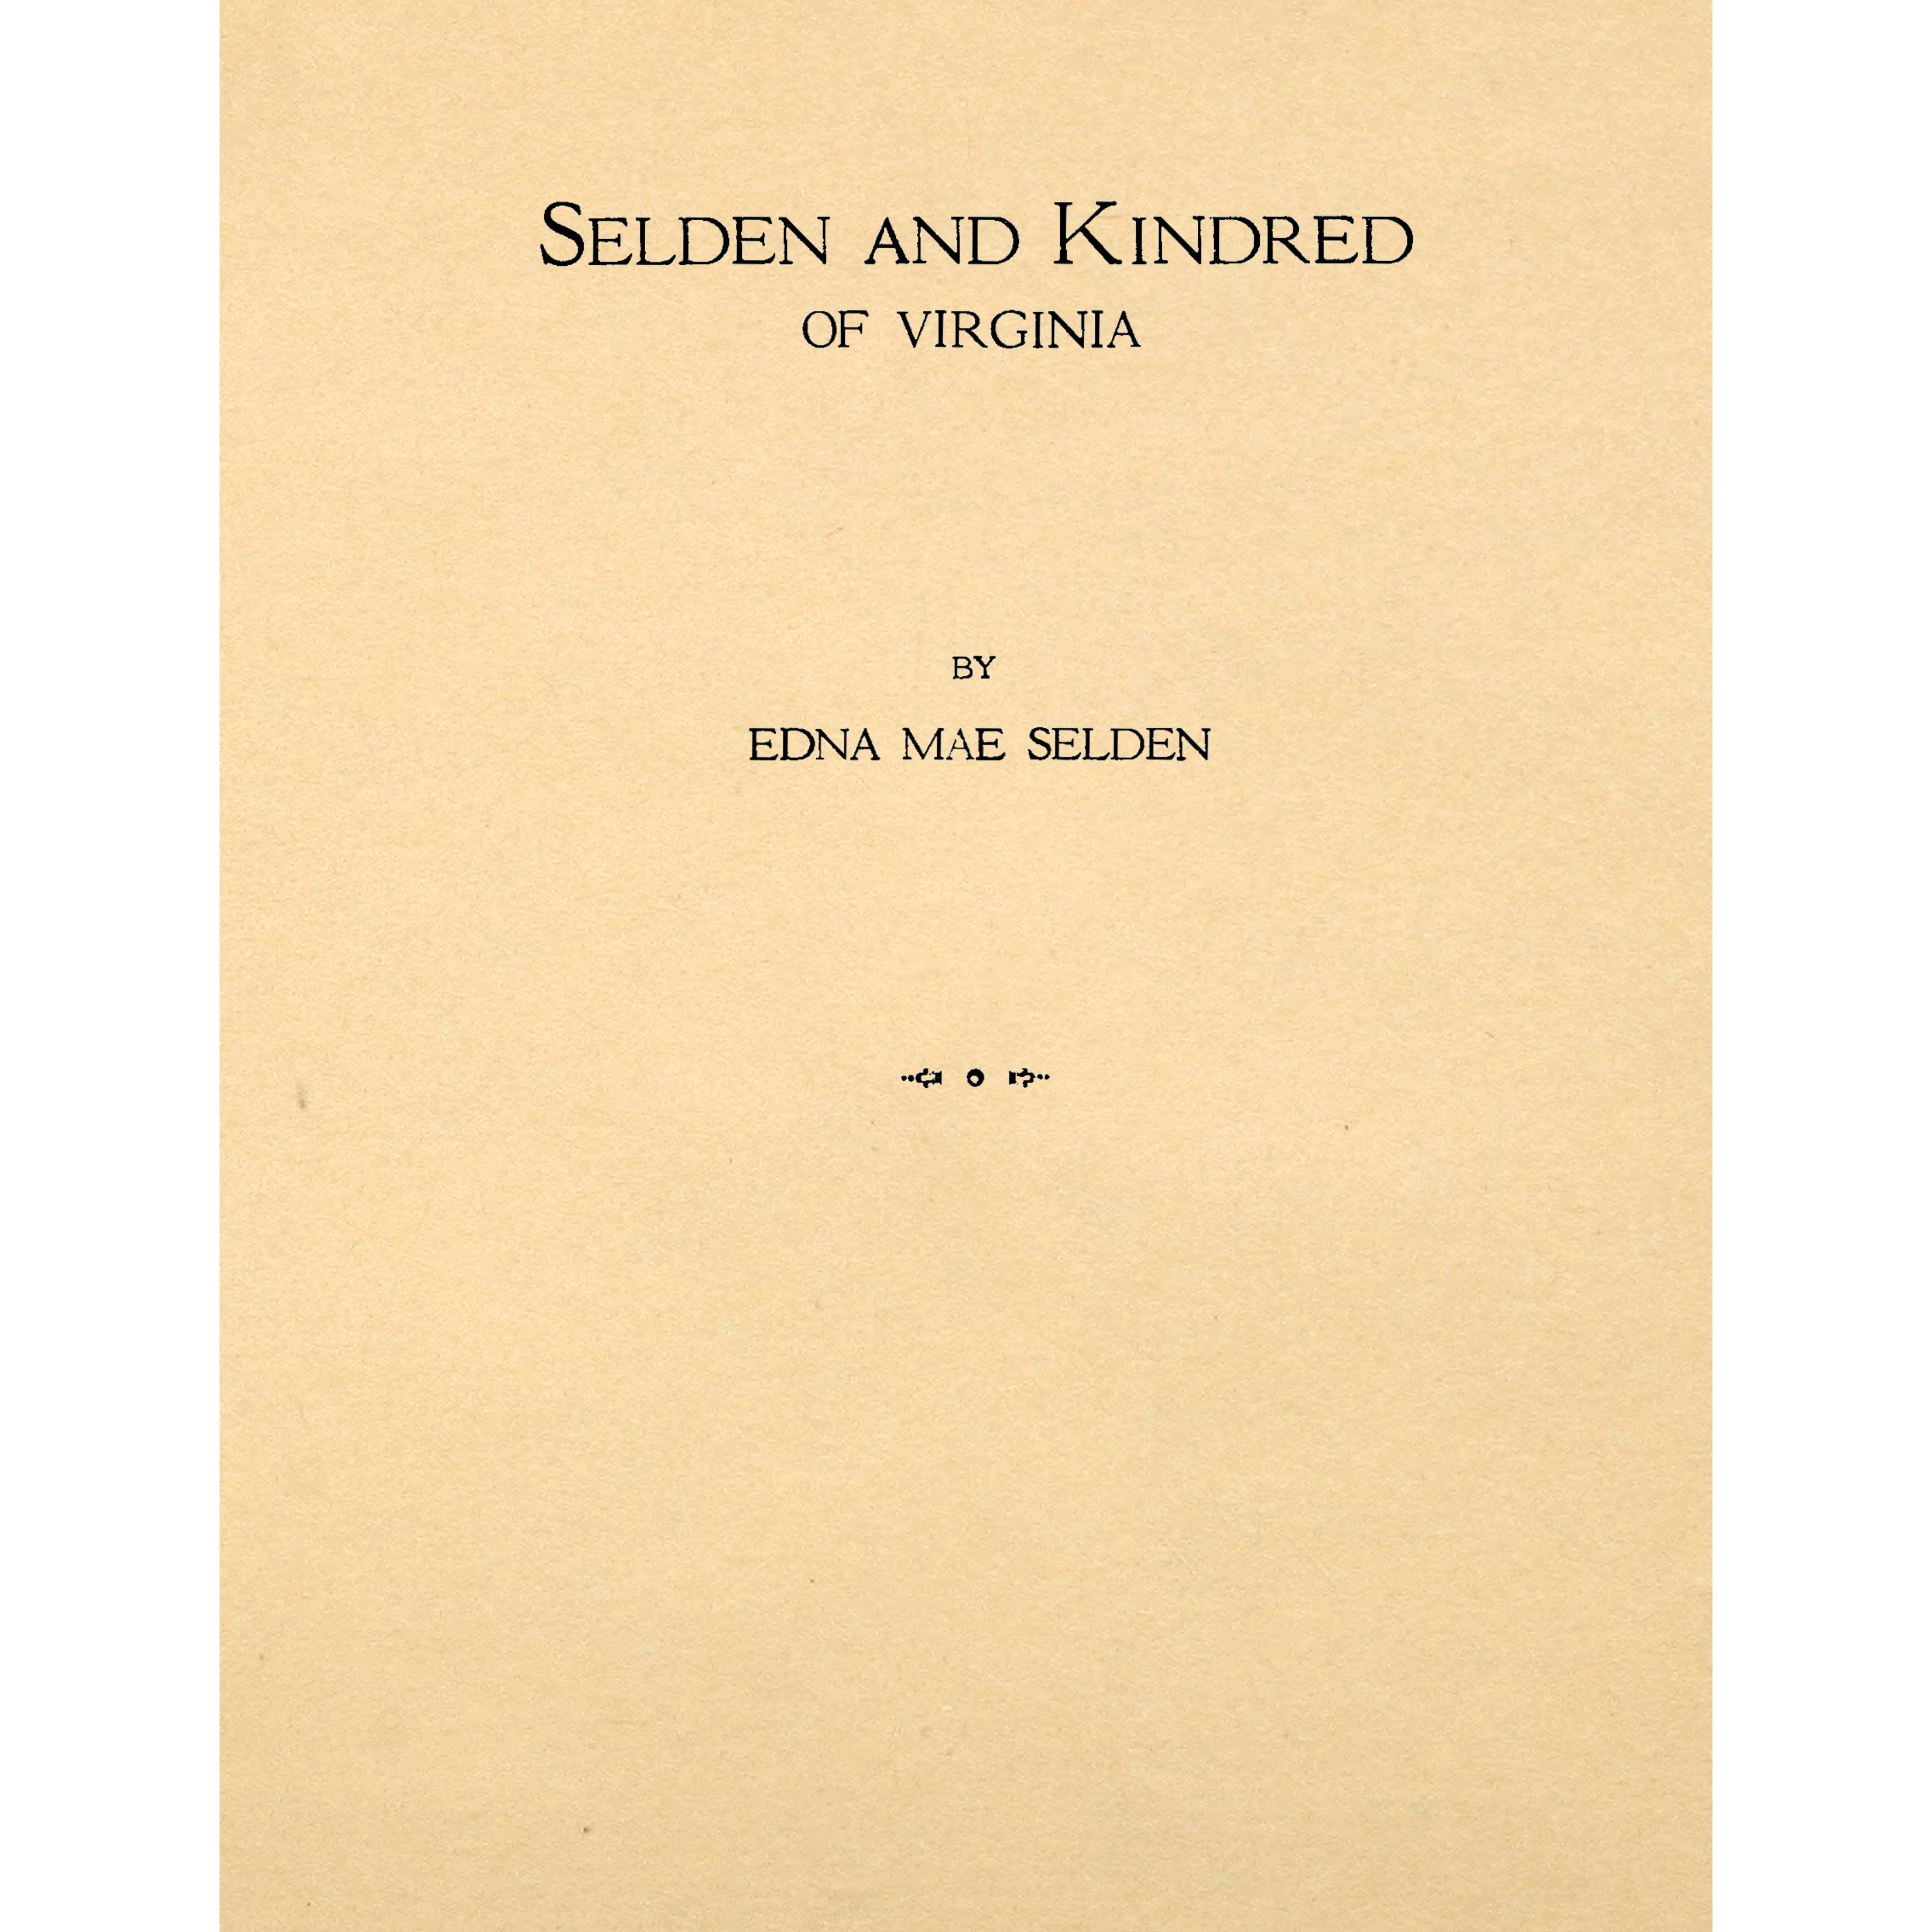 Selden and Kindred of Virginia